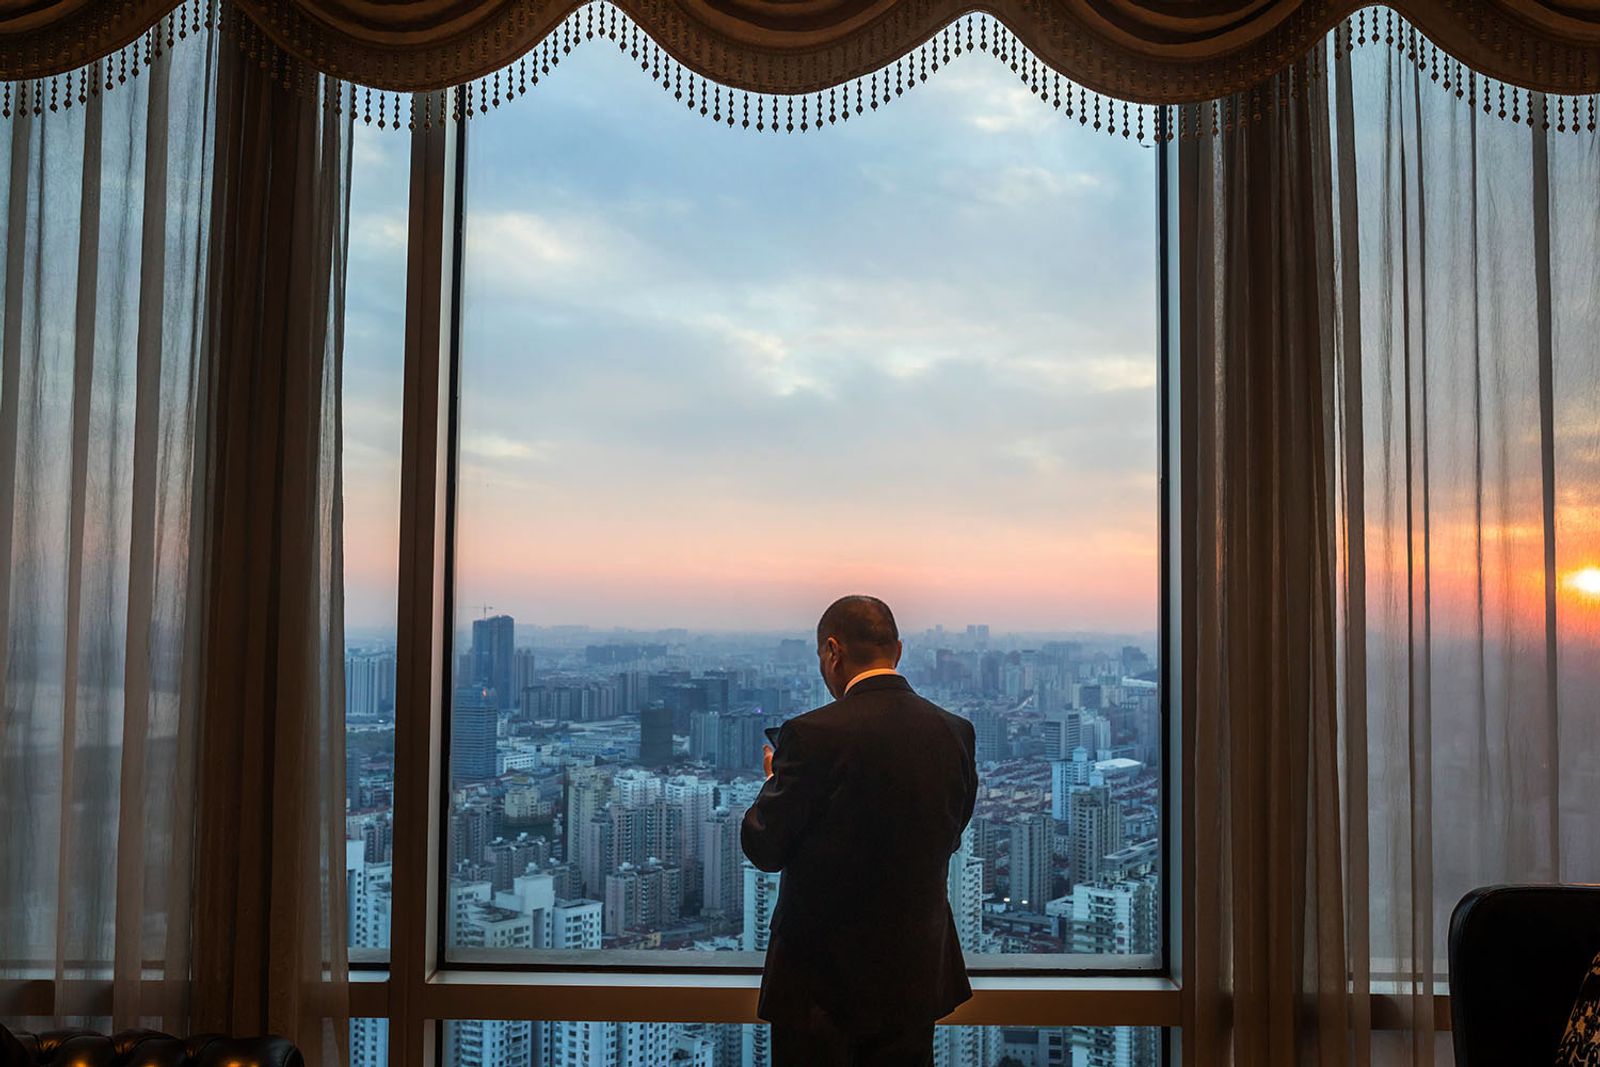 © Matjaz Krivic - A Chinese APG bussiness man after his meeting at the luxury hotel in Shanghai, China.